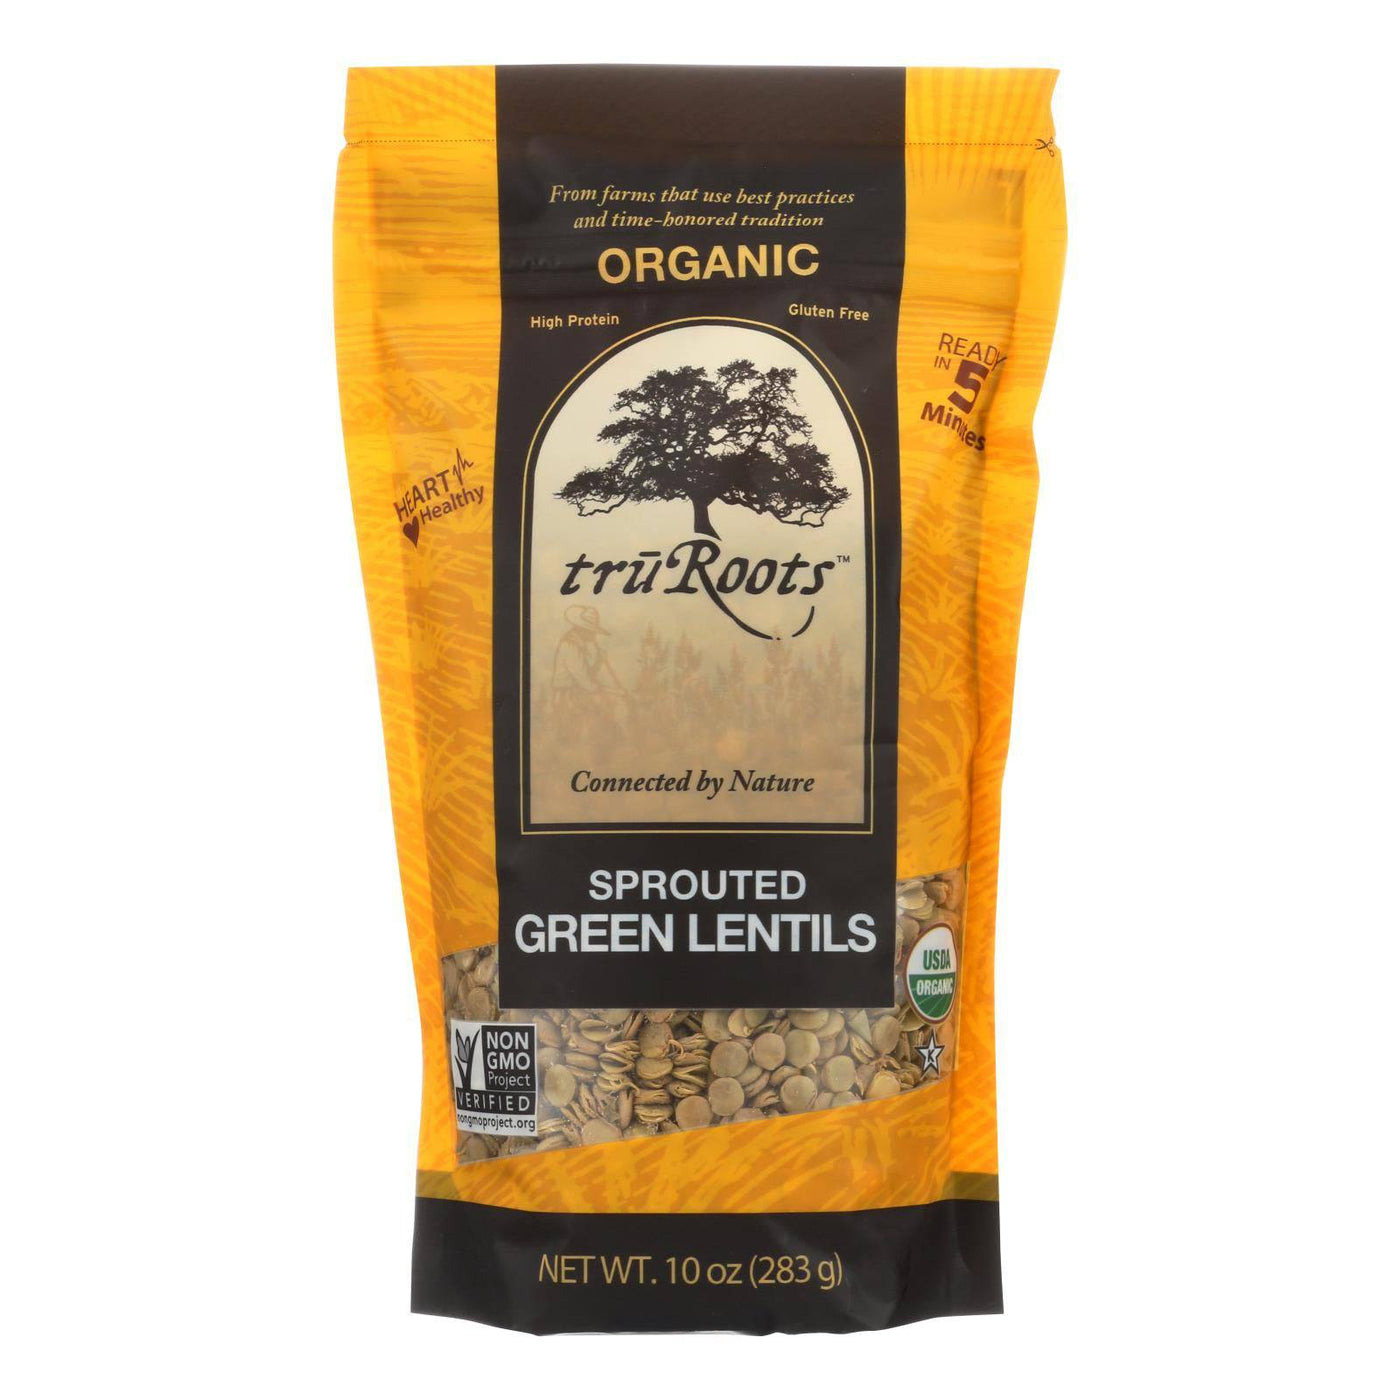 Truroots Organic Green Lentils - Sprouted - Case Of 6 - 10 Oz. | OnlyNaturals.us